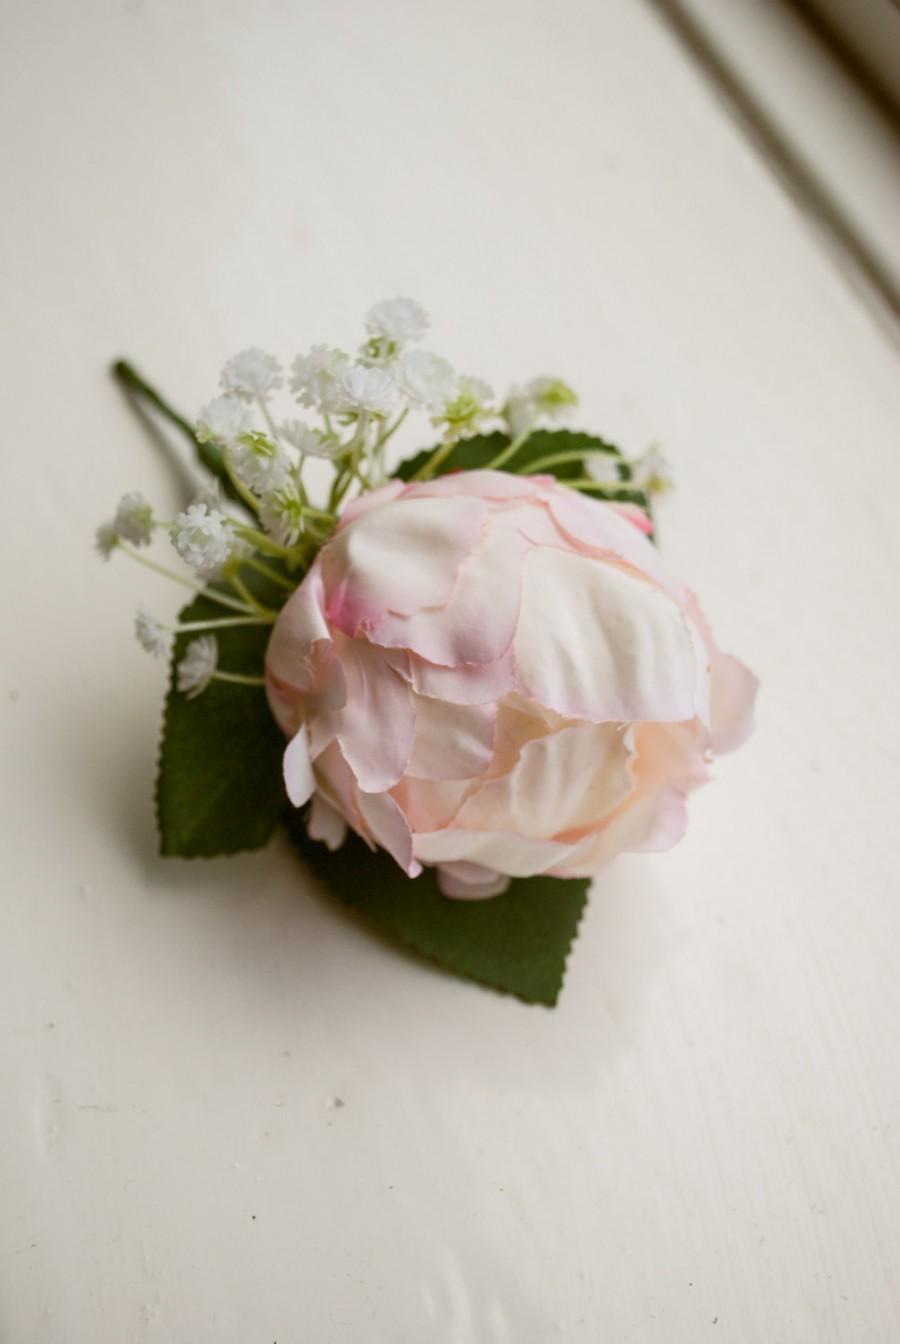 Wedding - Blush pink silk wedding buttonhole / boutineer. Made from an artificial peony, a gypsophilia cluster and simple greenery.